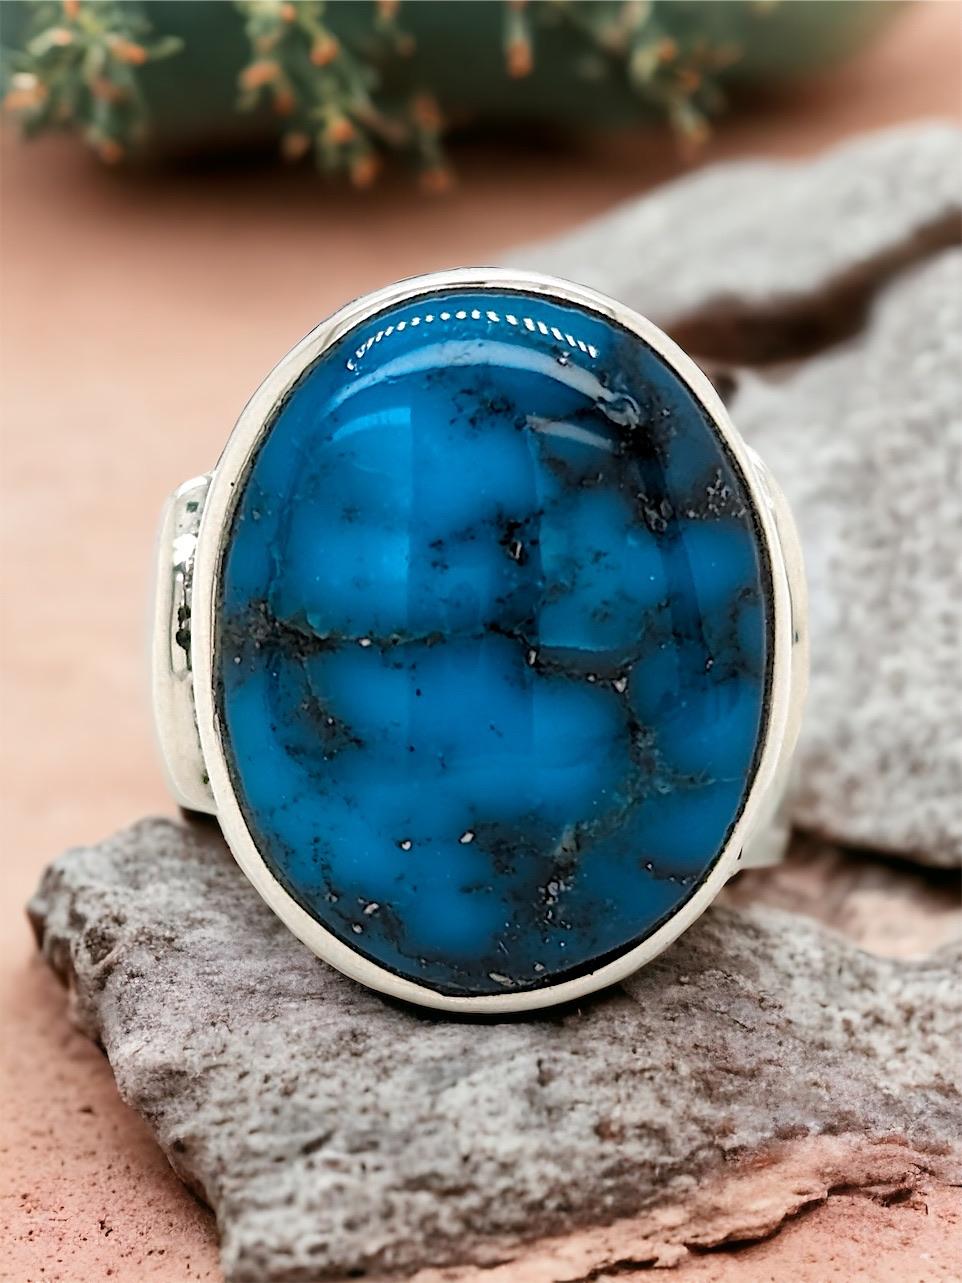 Make a statement with this captivating Sterling Silver Ring (Size 7). Featuring a bold Kingman turquoise gemstone, this ring is a true celebration of color and Southwestern style.

Eye-Catching Beauty: The vibrant blue hues and intricate matrix